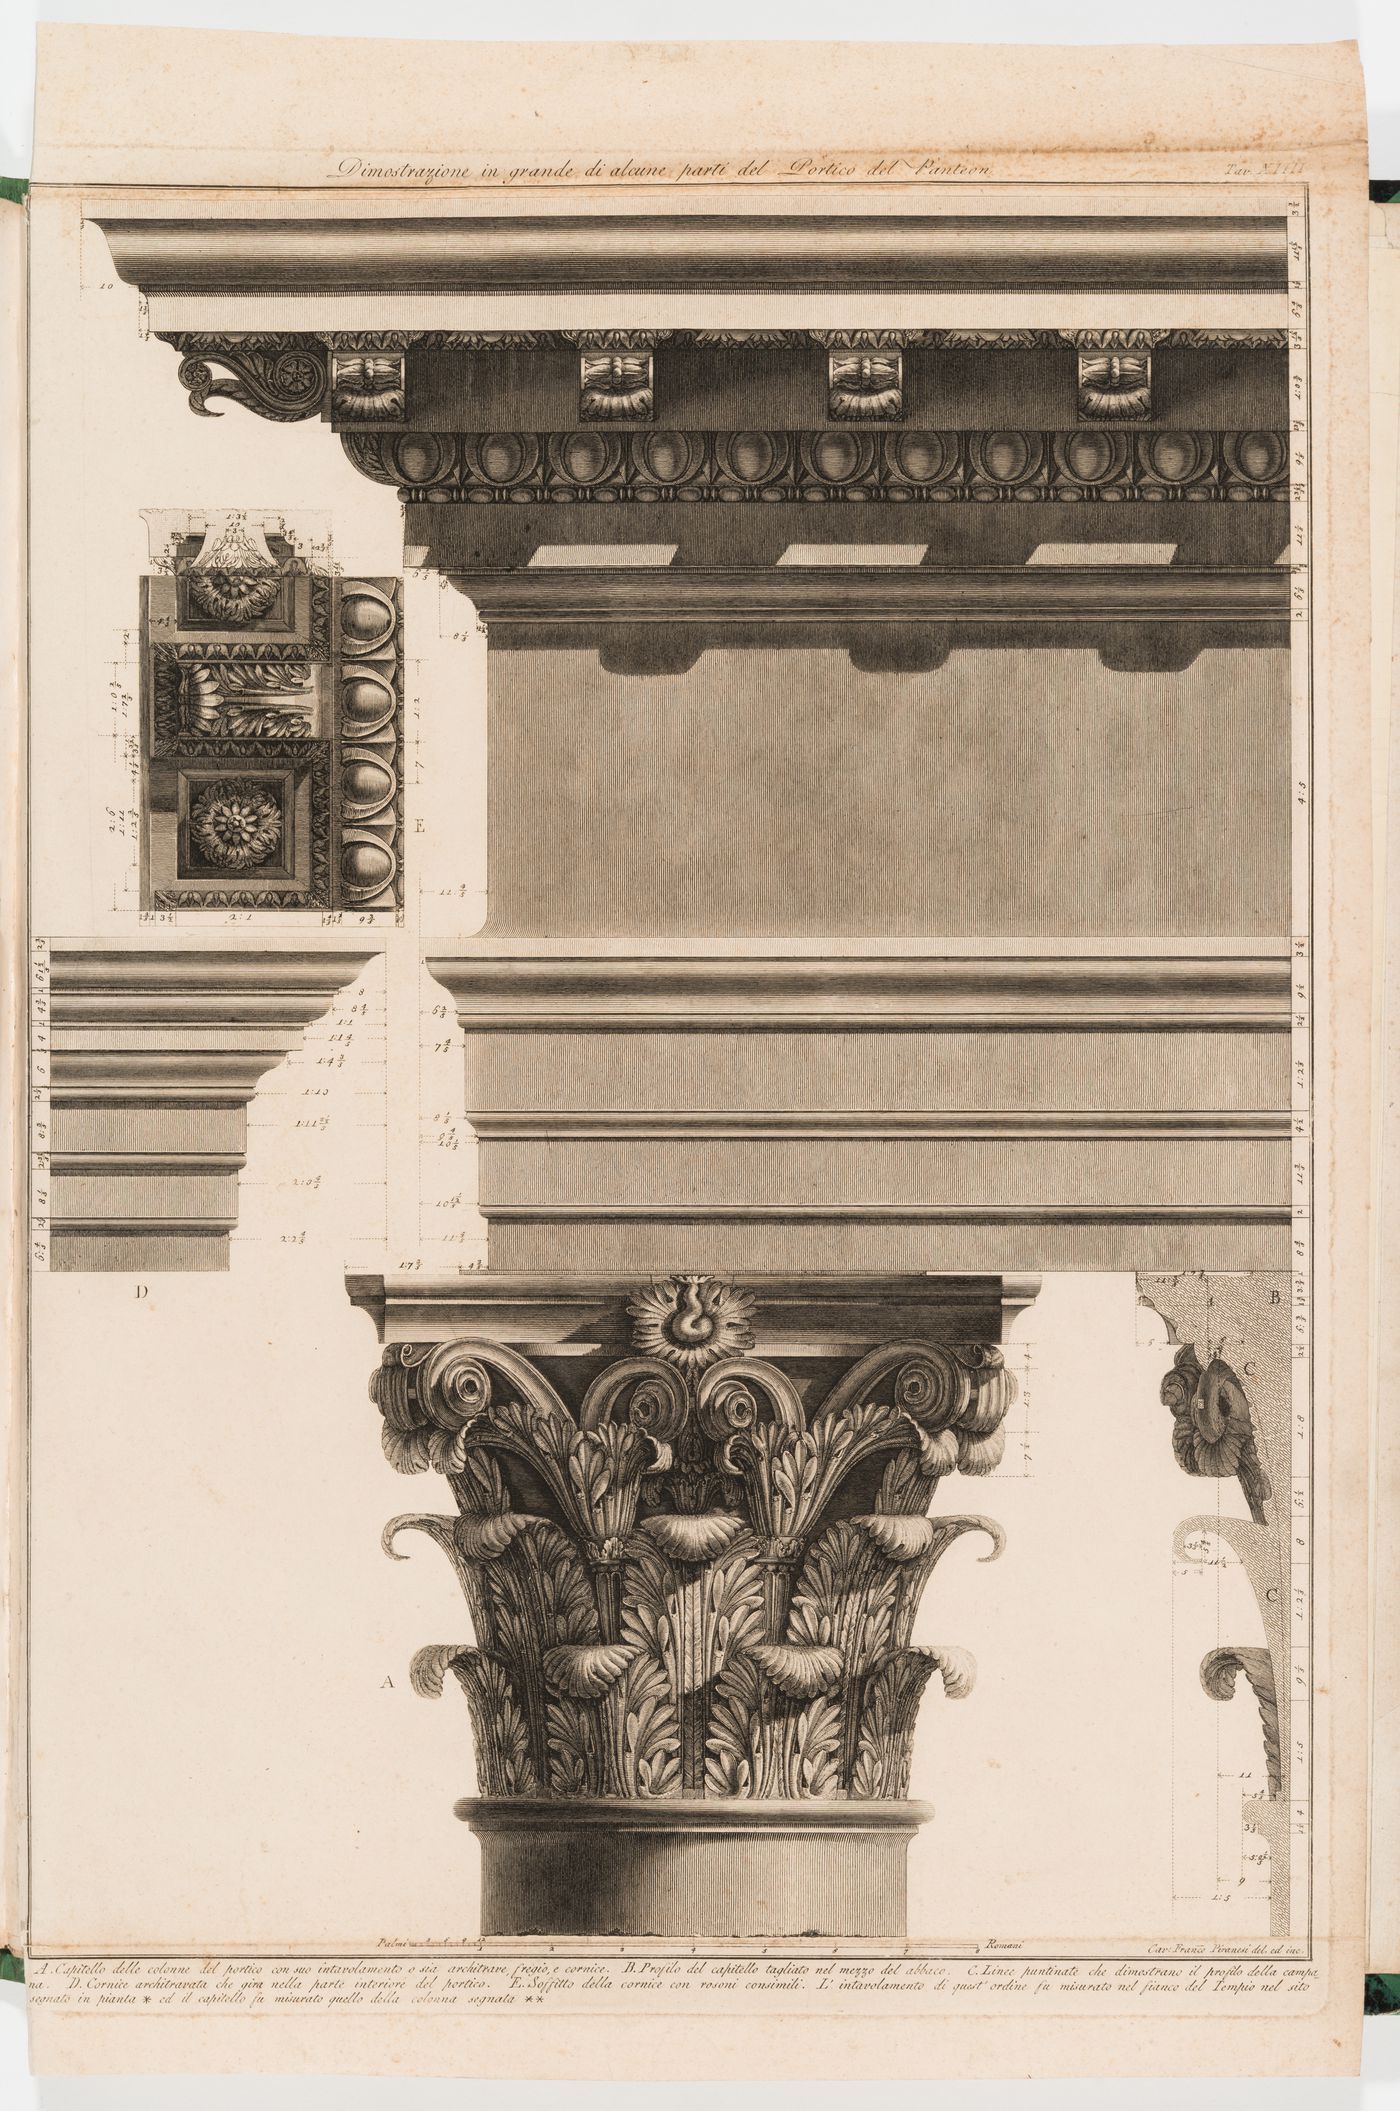 Elevation, profile, and sections of a Corinthian capital and entablature from the portico of the Pantheon, Rome